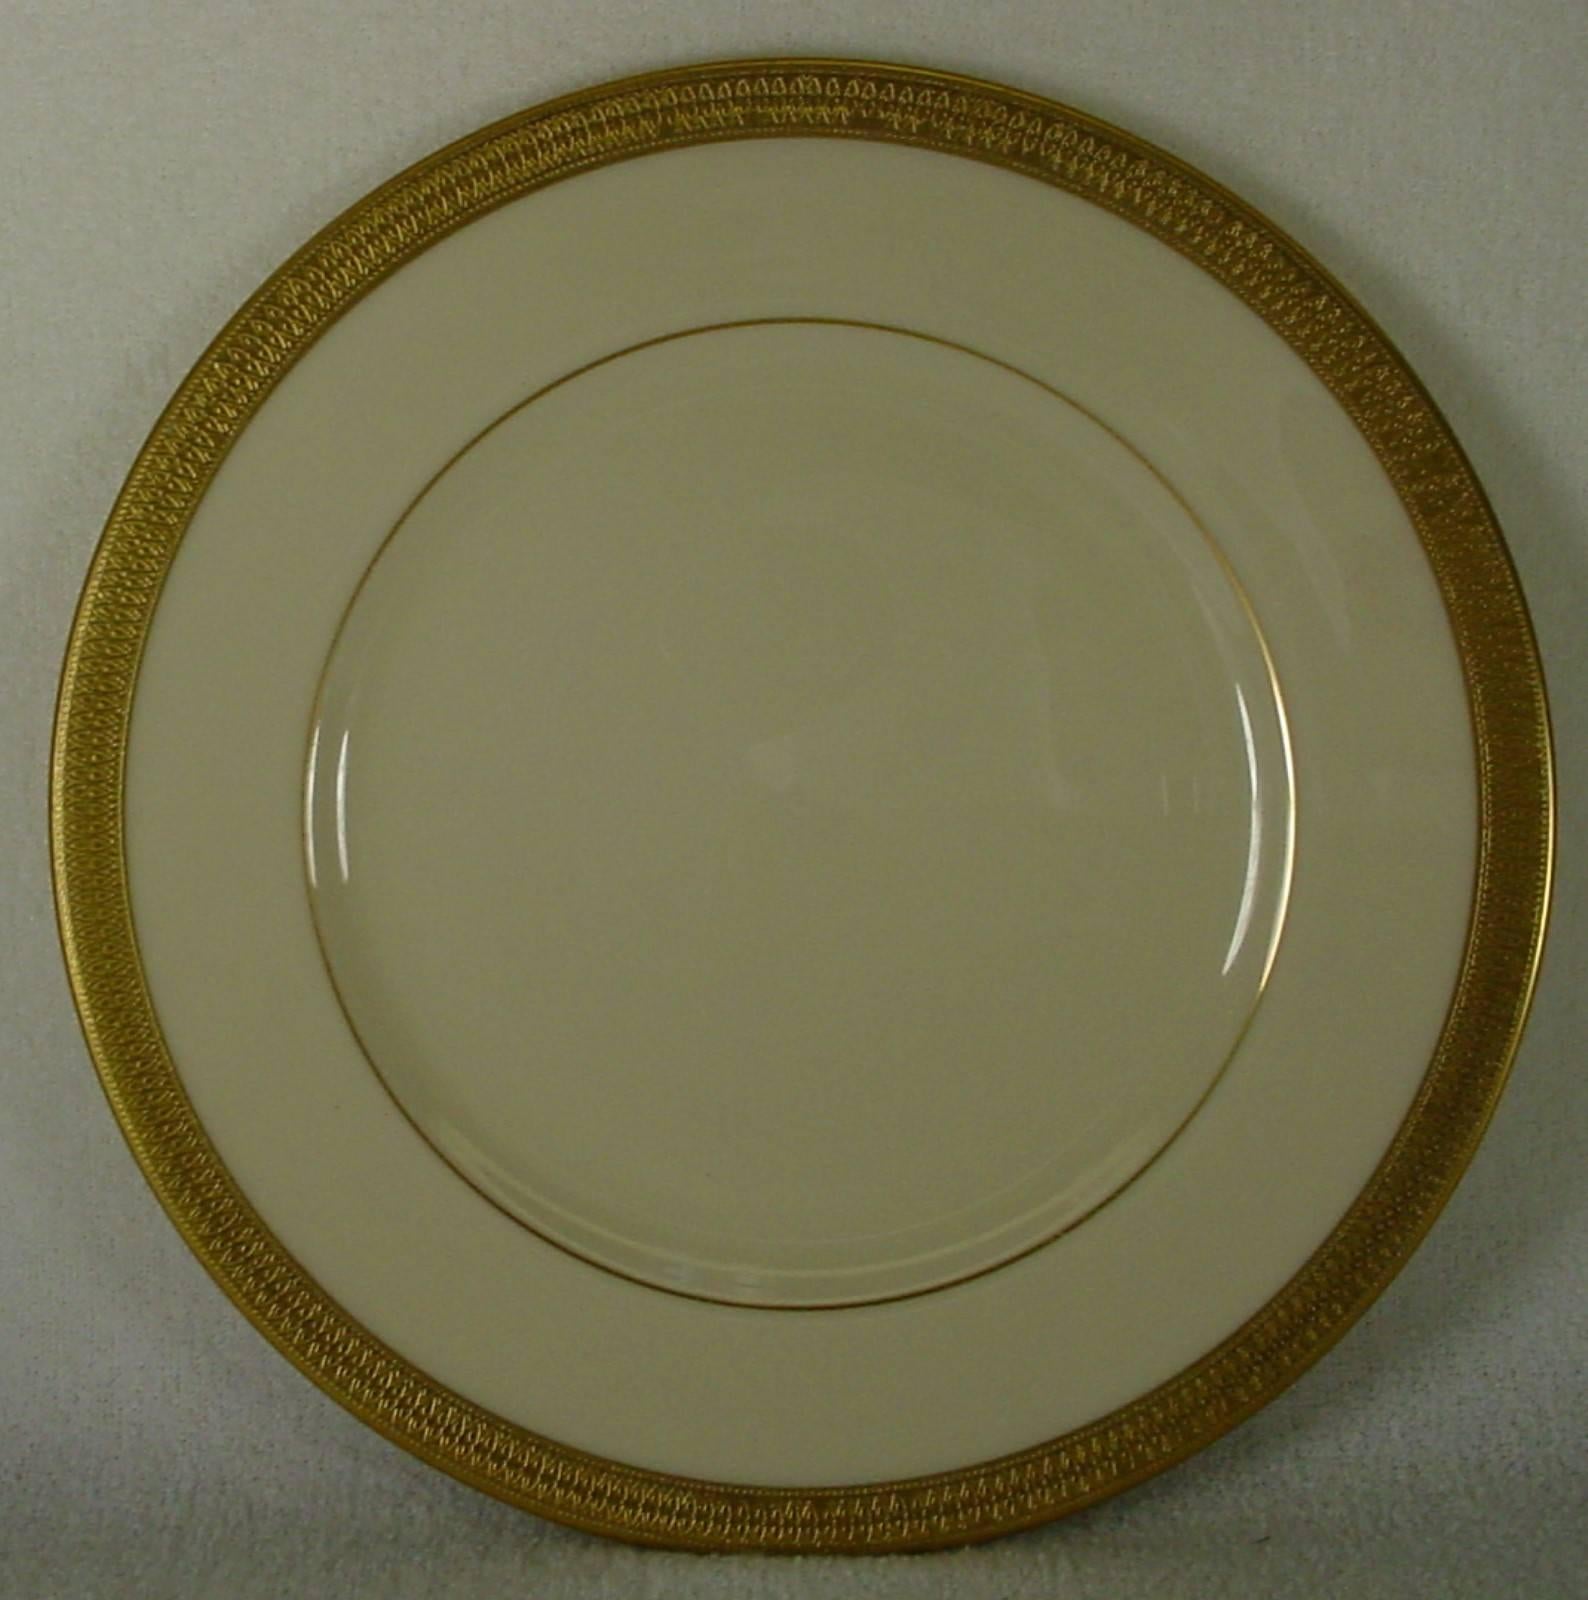 LENOX china LOWELL pattern 60-piece SET SERVICE for Twelve (12)

in great condition free from chips, cracks, break, stain, or discoloration and with only a minimum of use.

• Mfg 1917. 

• Encursted Gold Band.

• Presidential Shape.

•